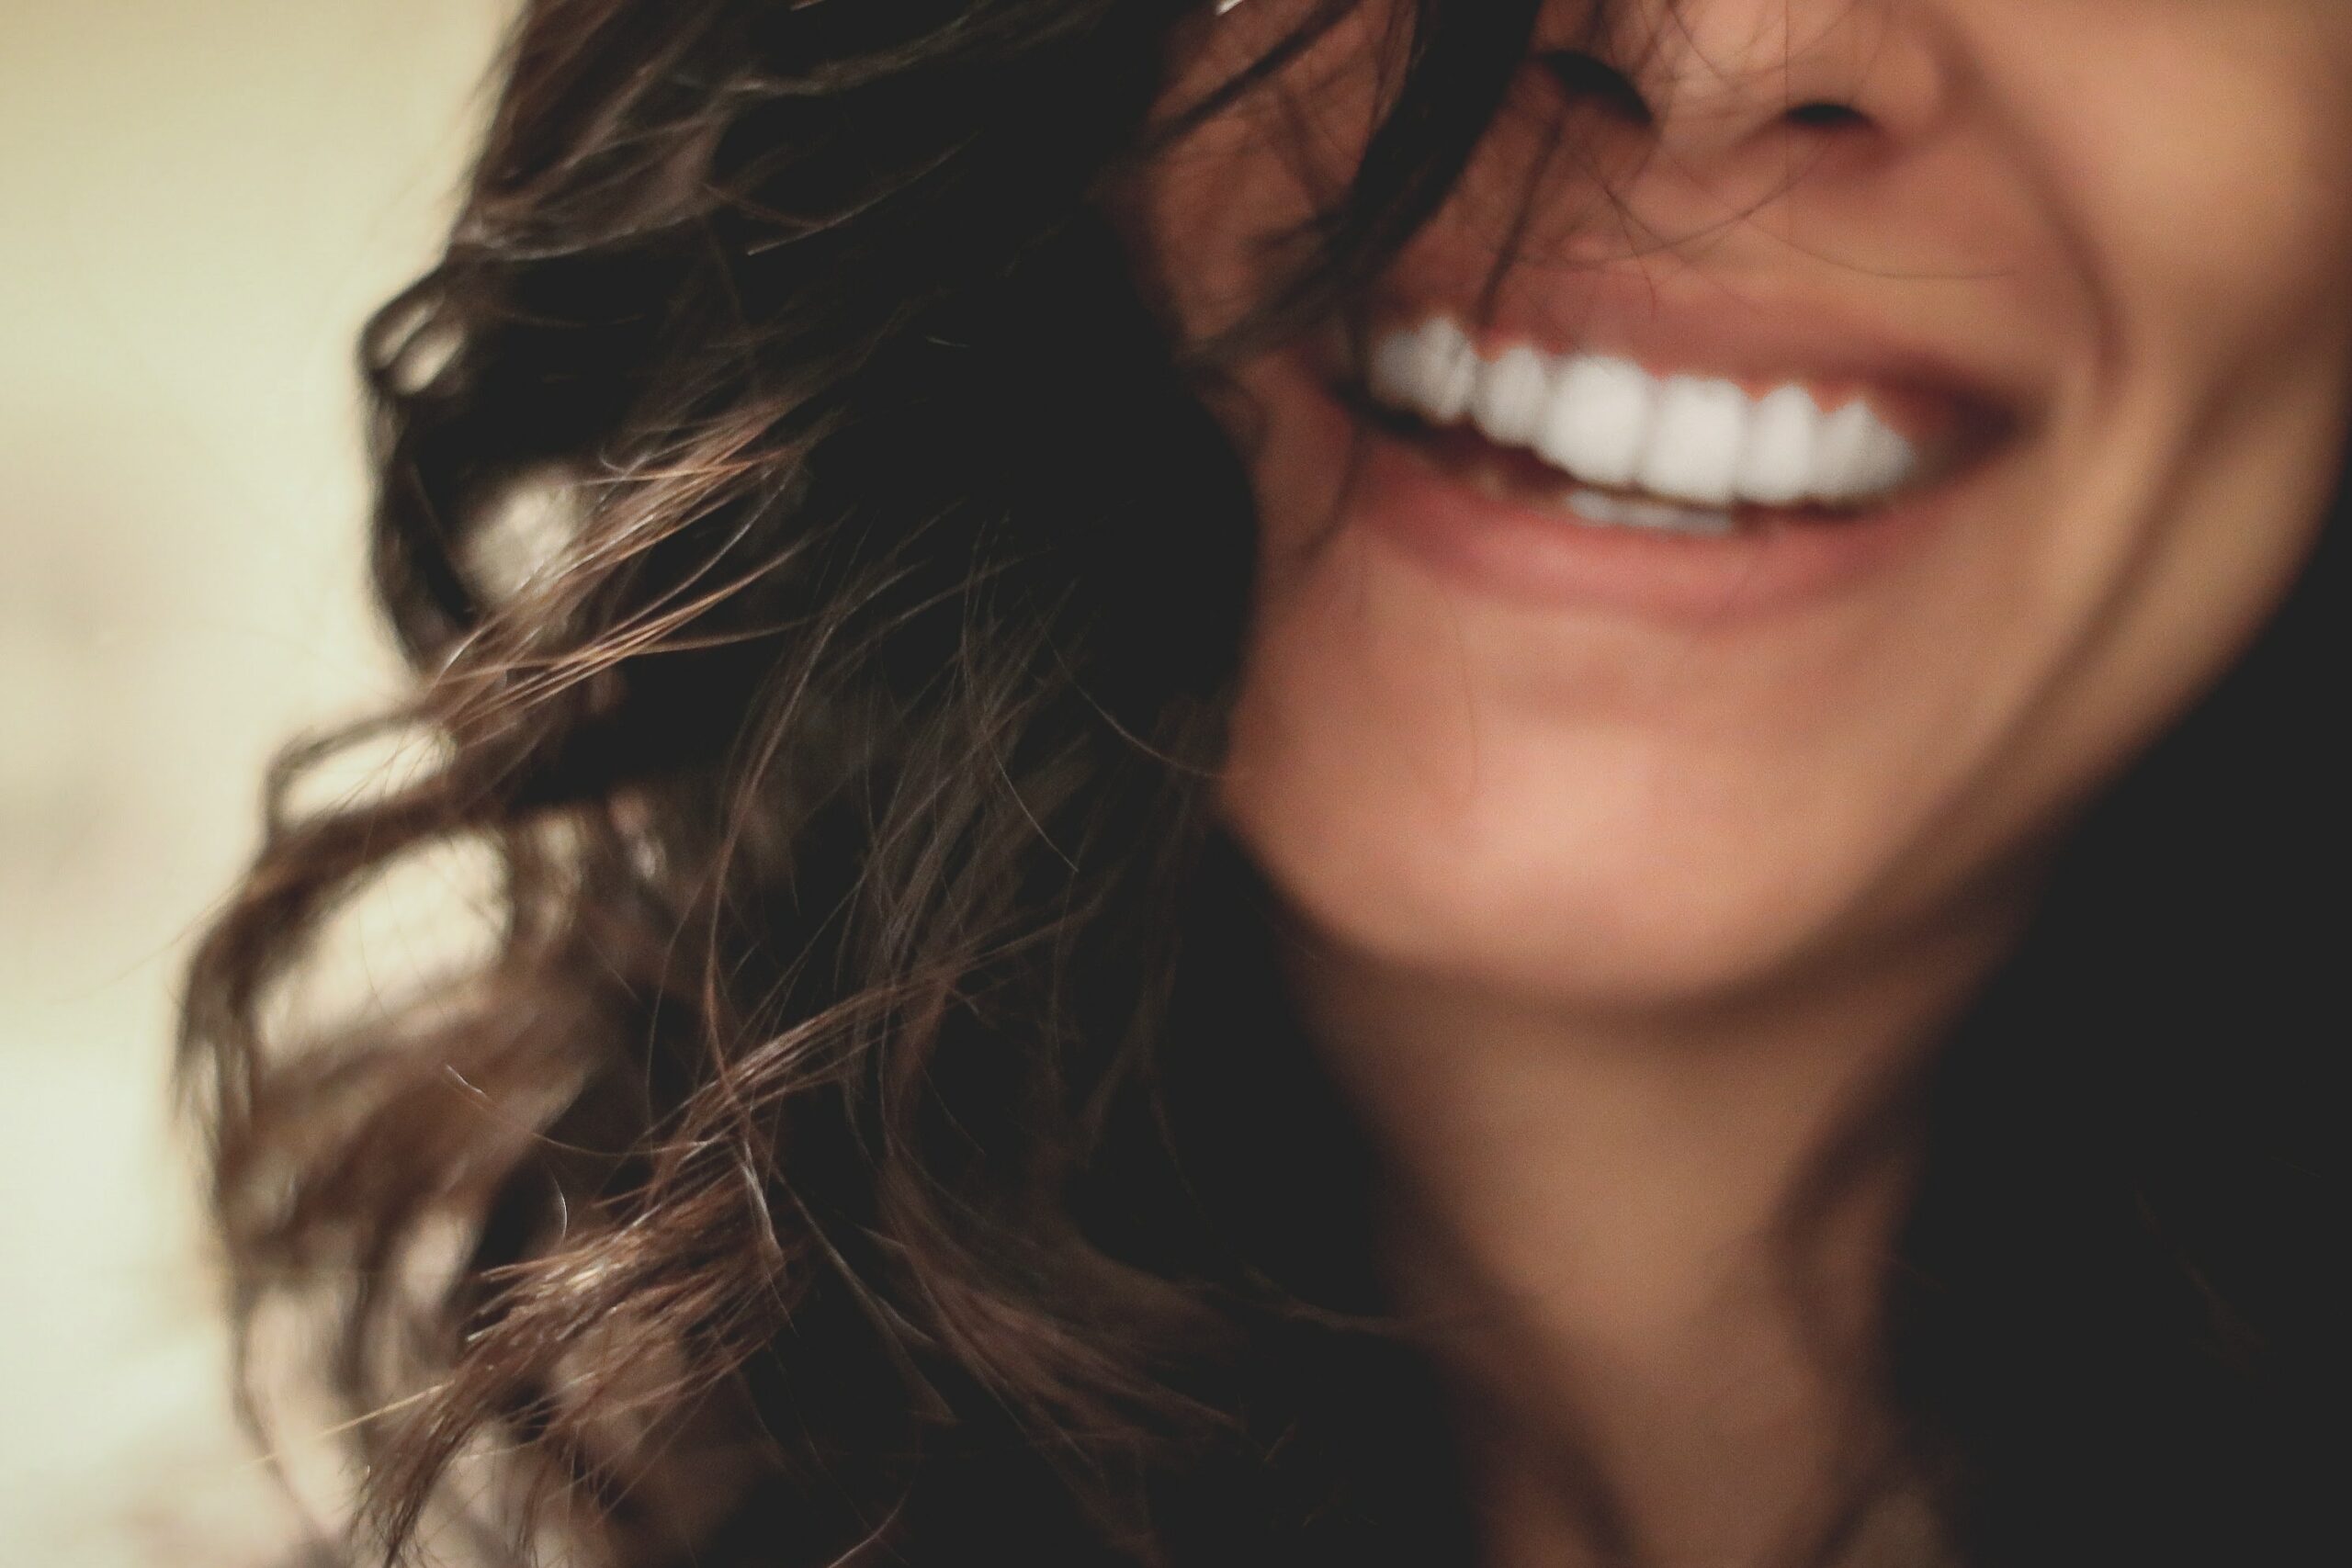 Curly-haired woman showcasing her brilliantly white, perfect smile